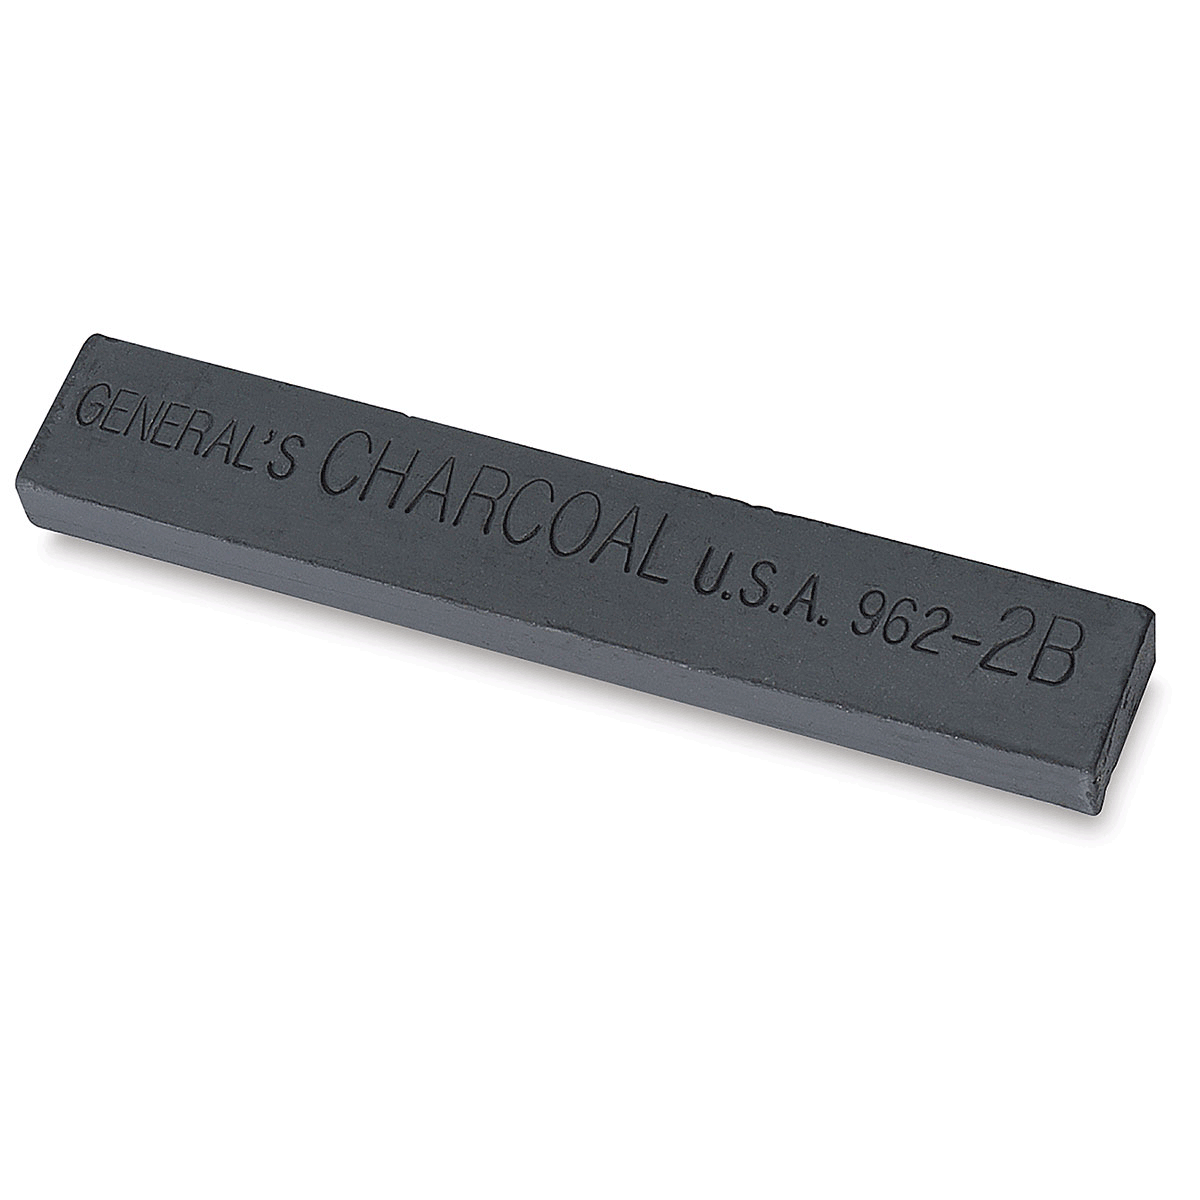 Gerneral's Compressed Charcoal Square Stick - 4B